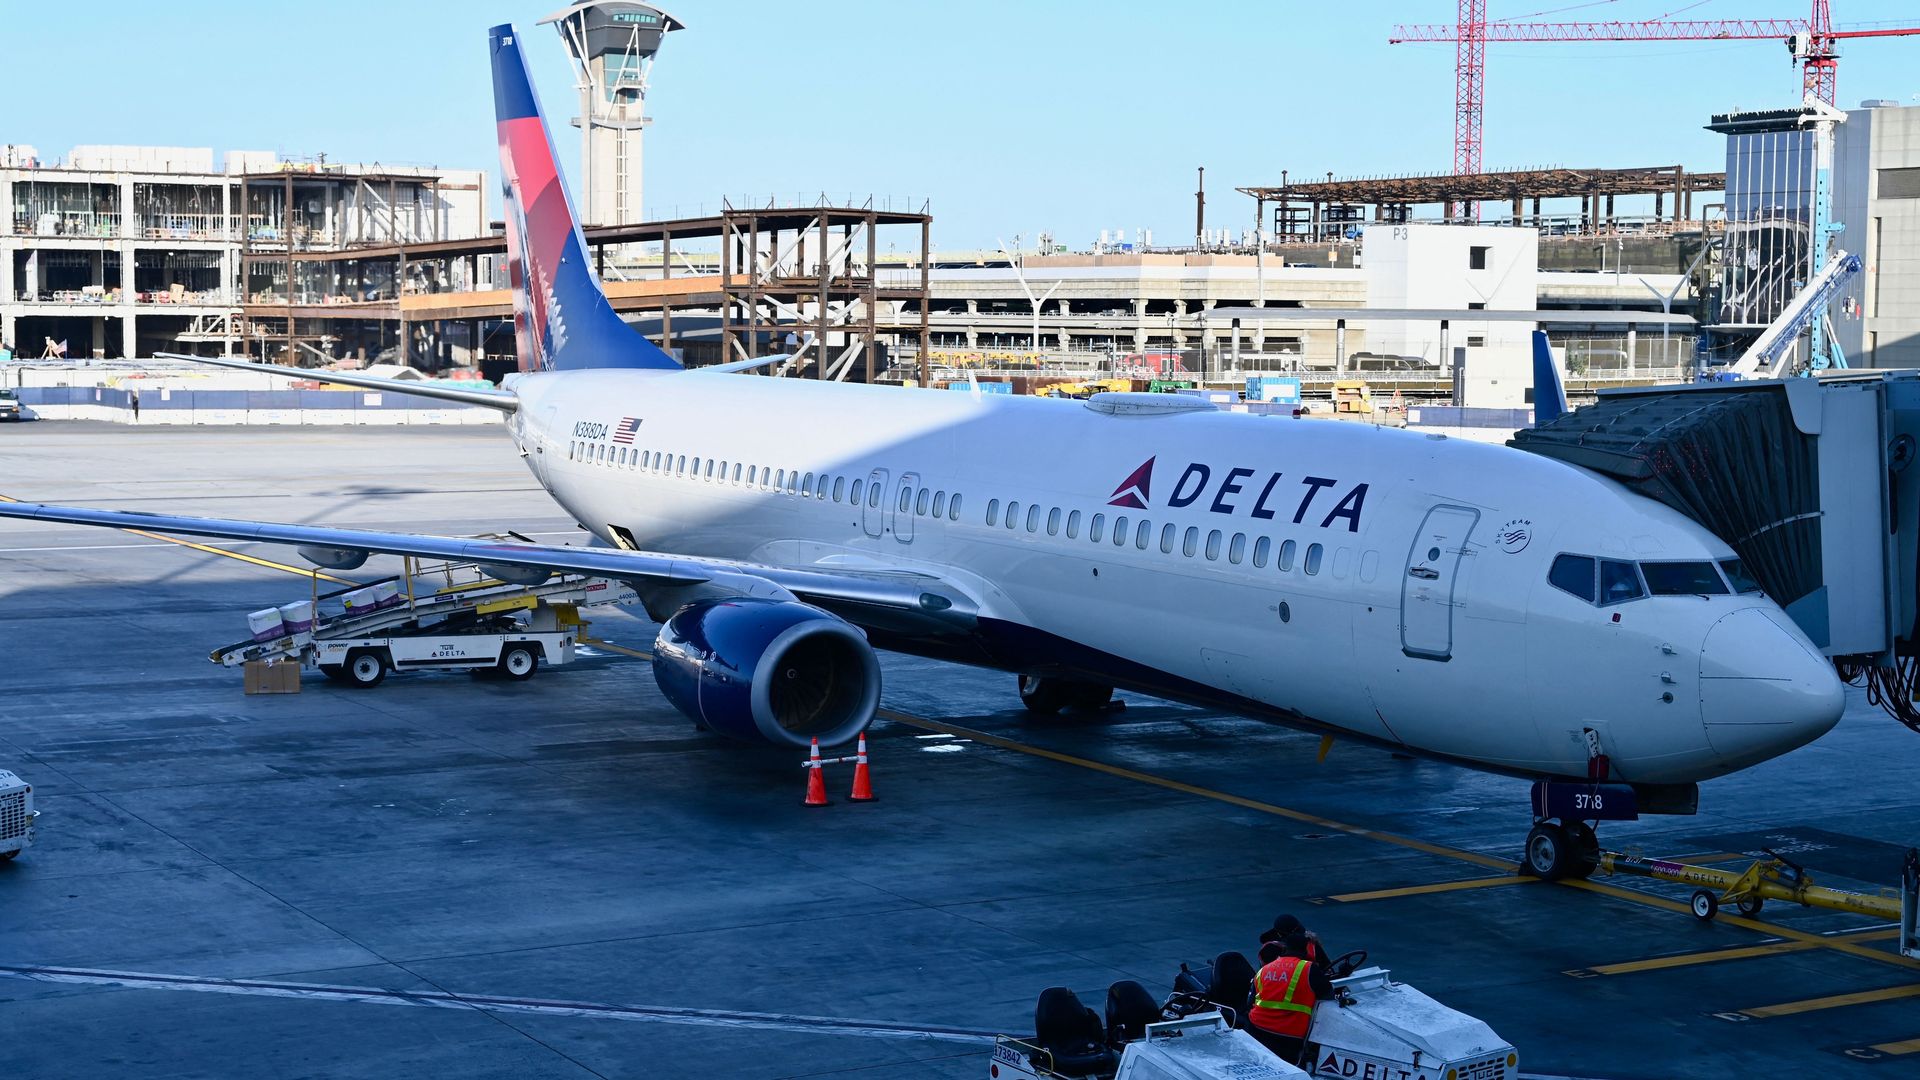 A Delta Air Lines jet parked at a gate